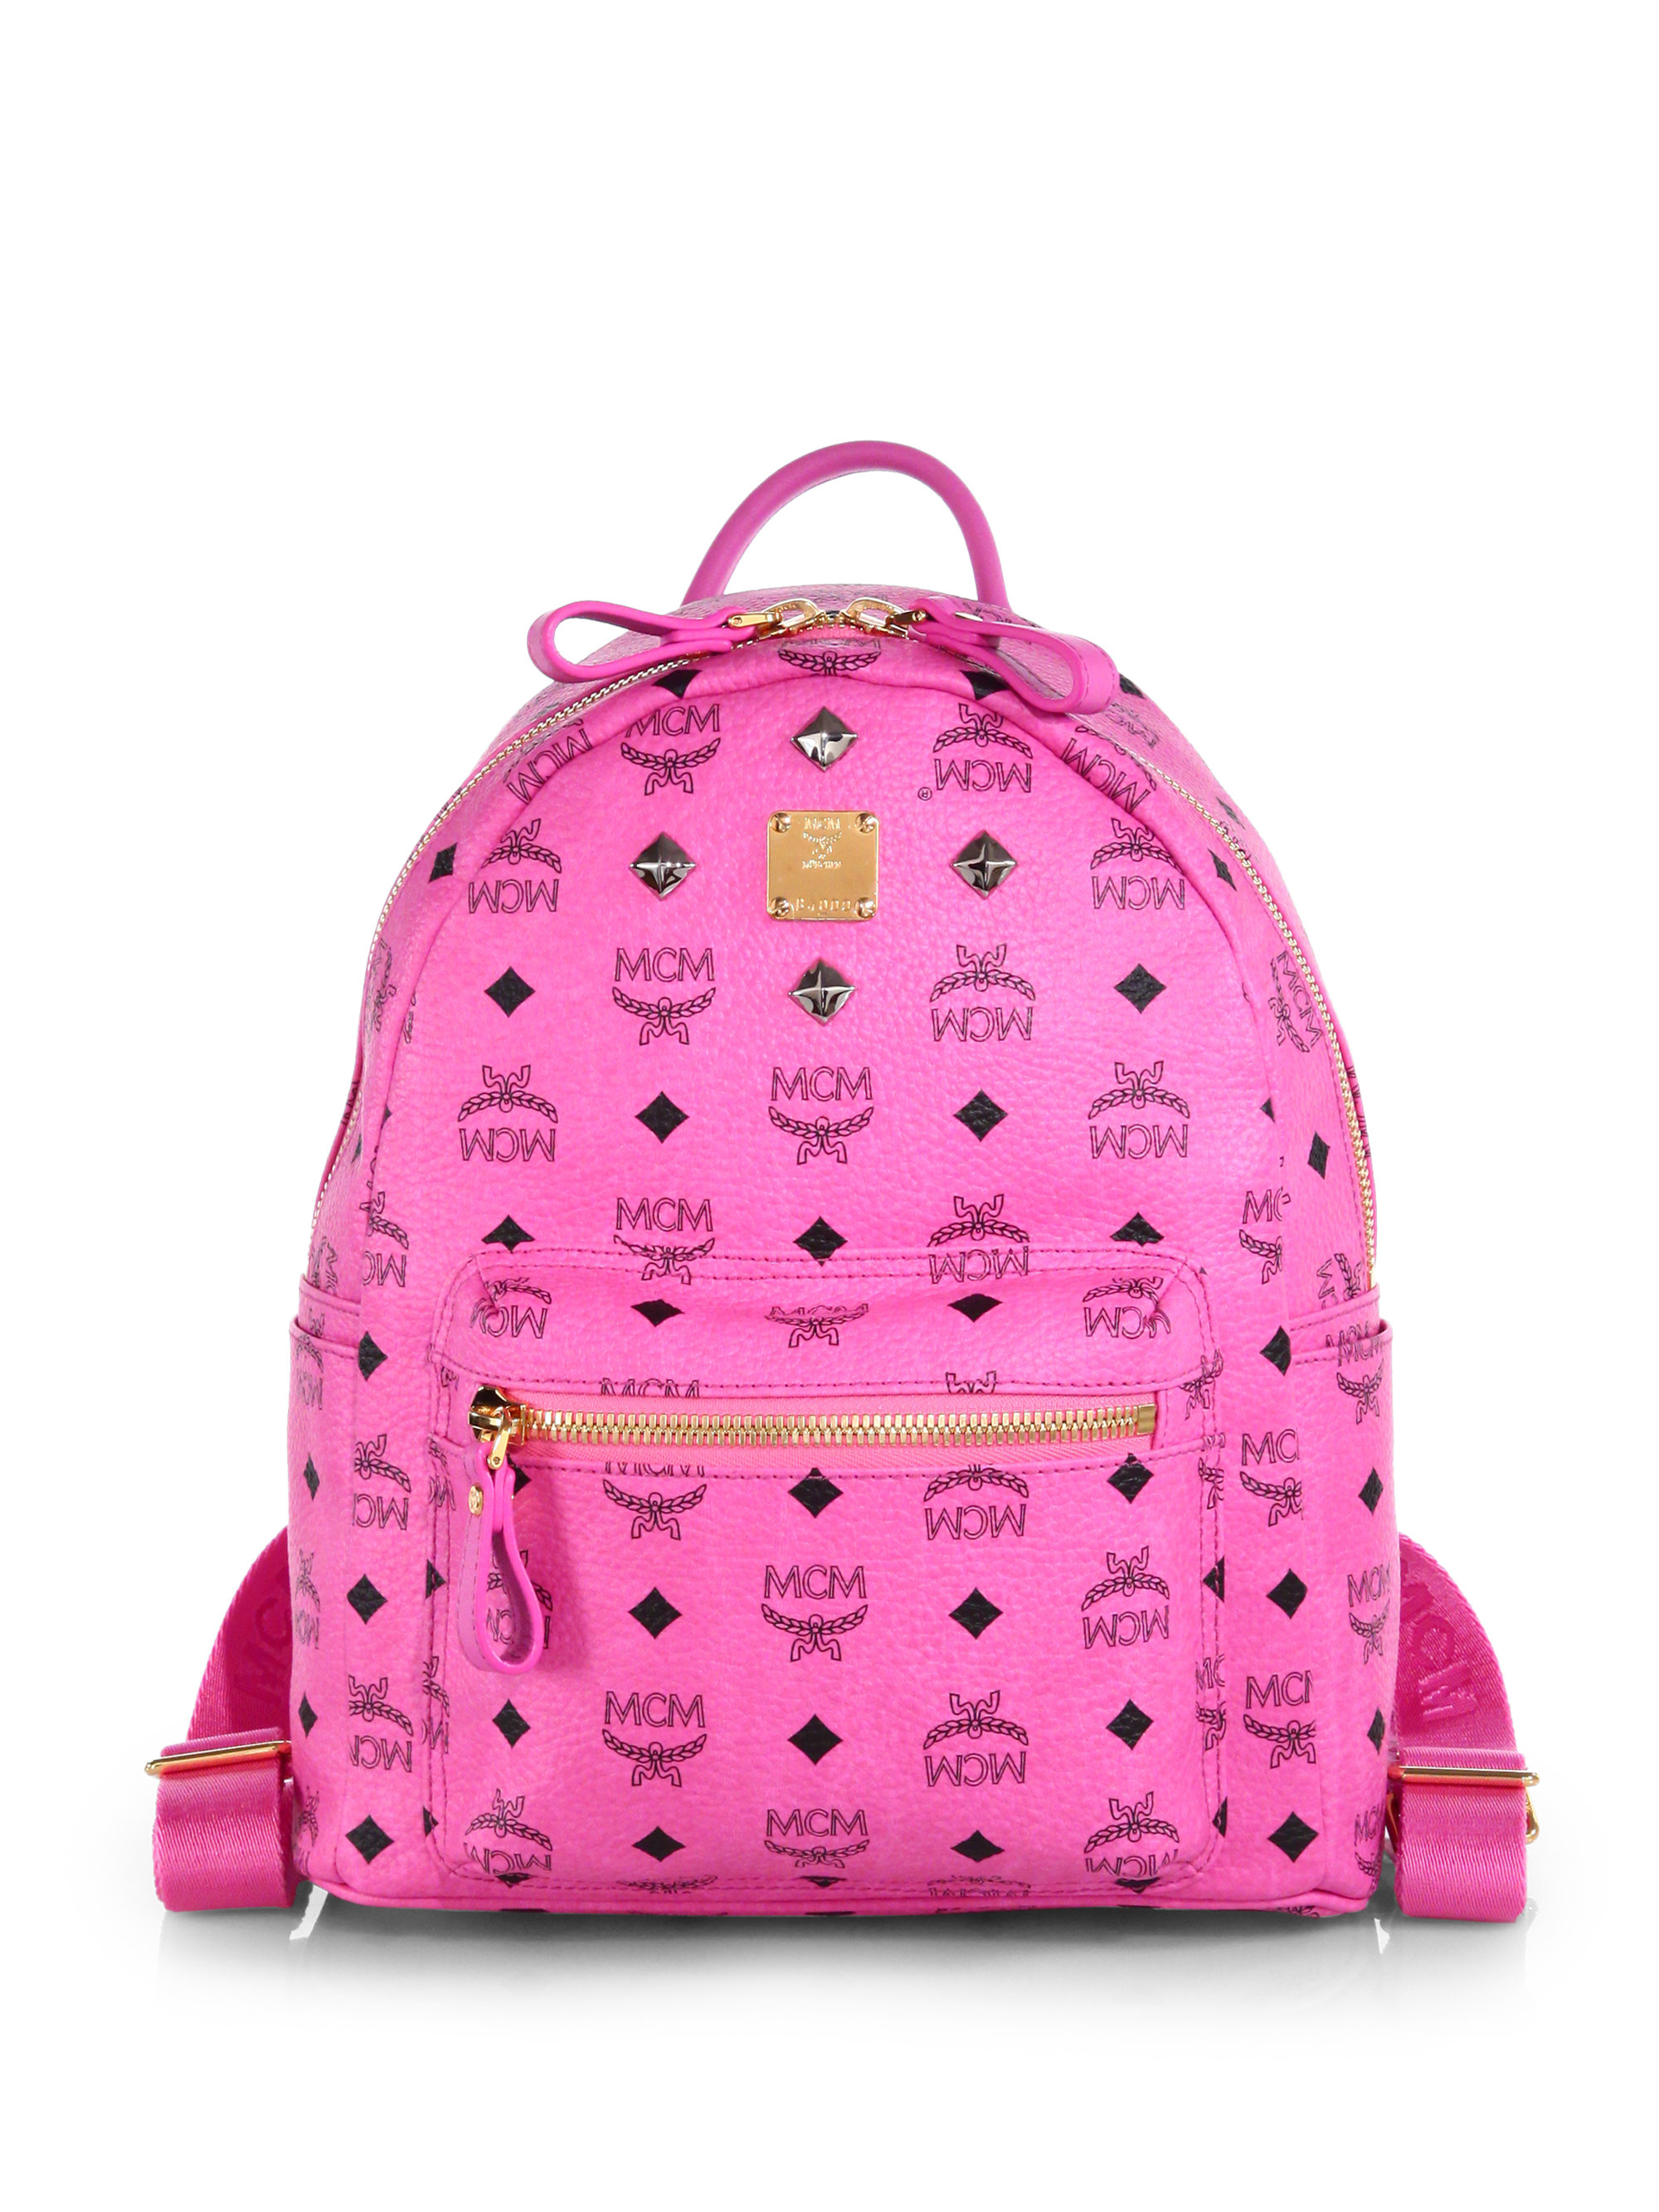 Mcm Stark Sprinkle Stud Small Coated Canvas Backpack in Pink | Lyst